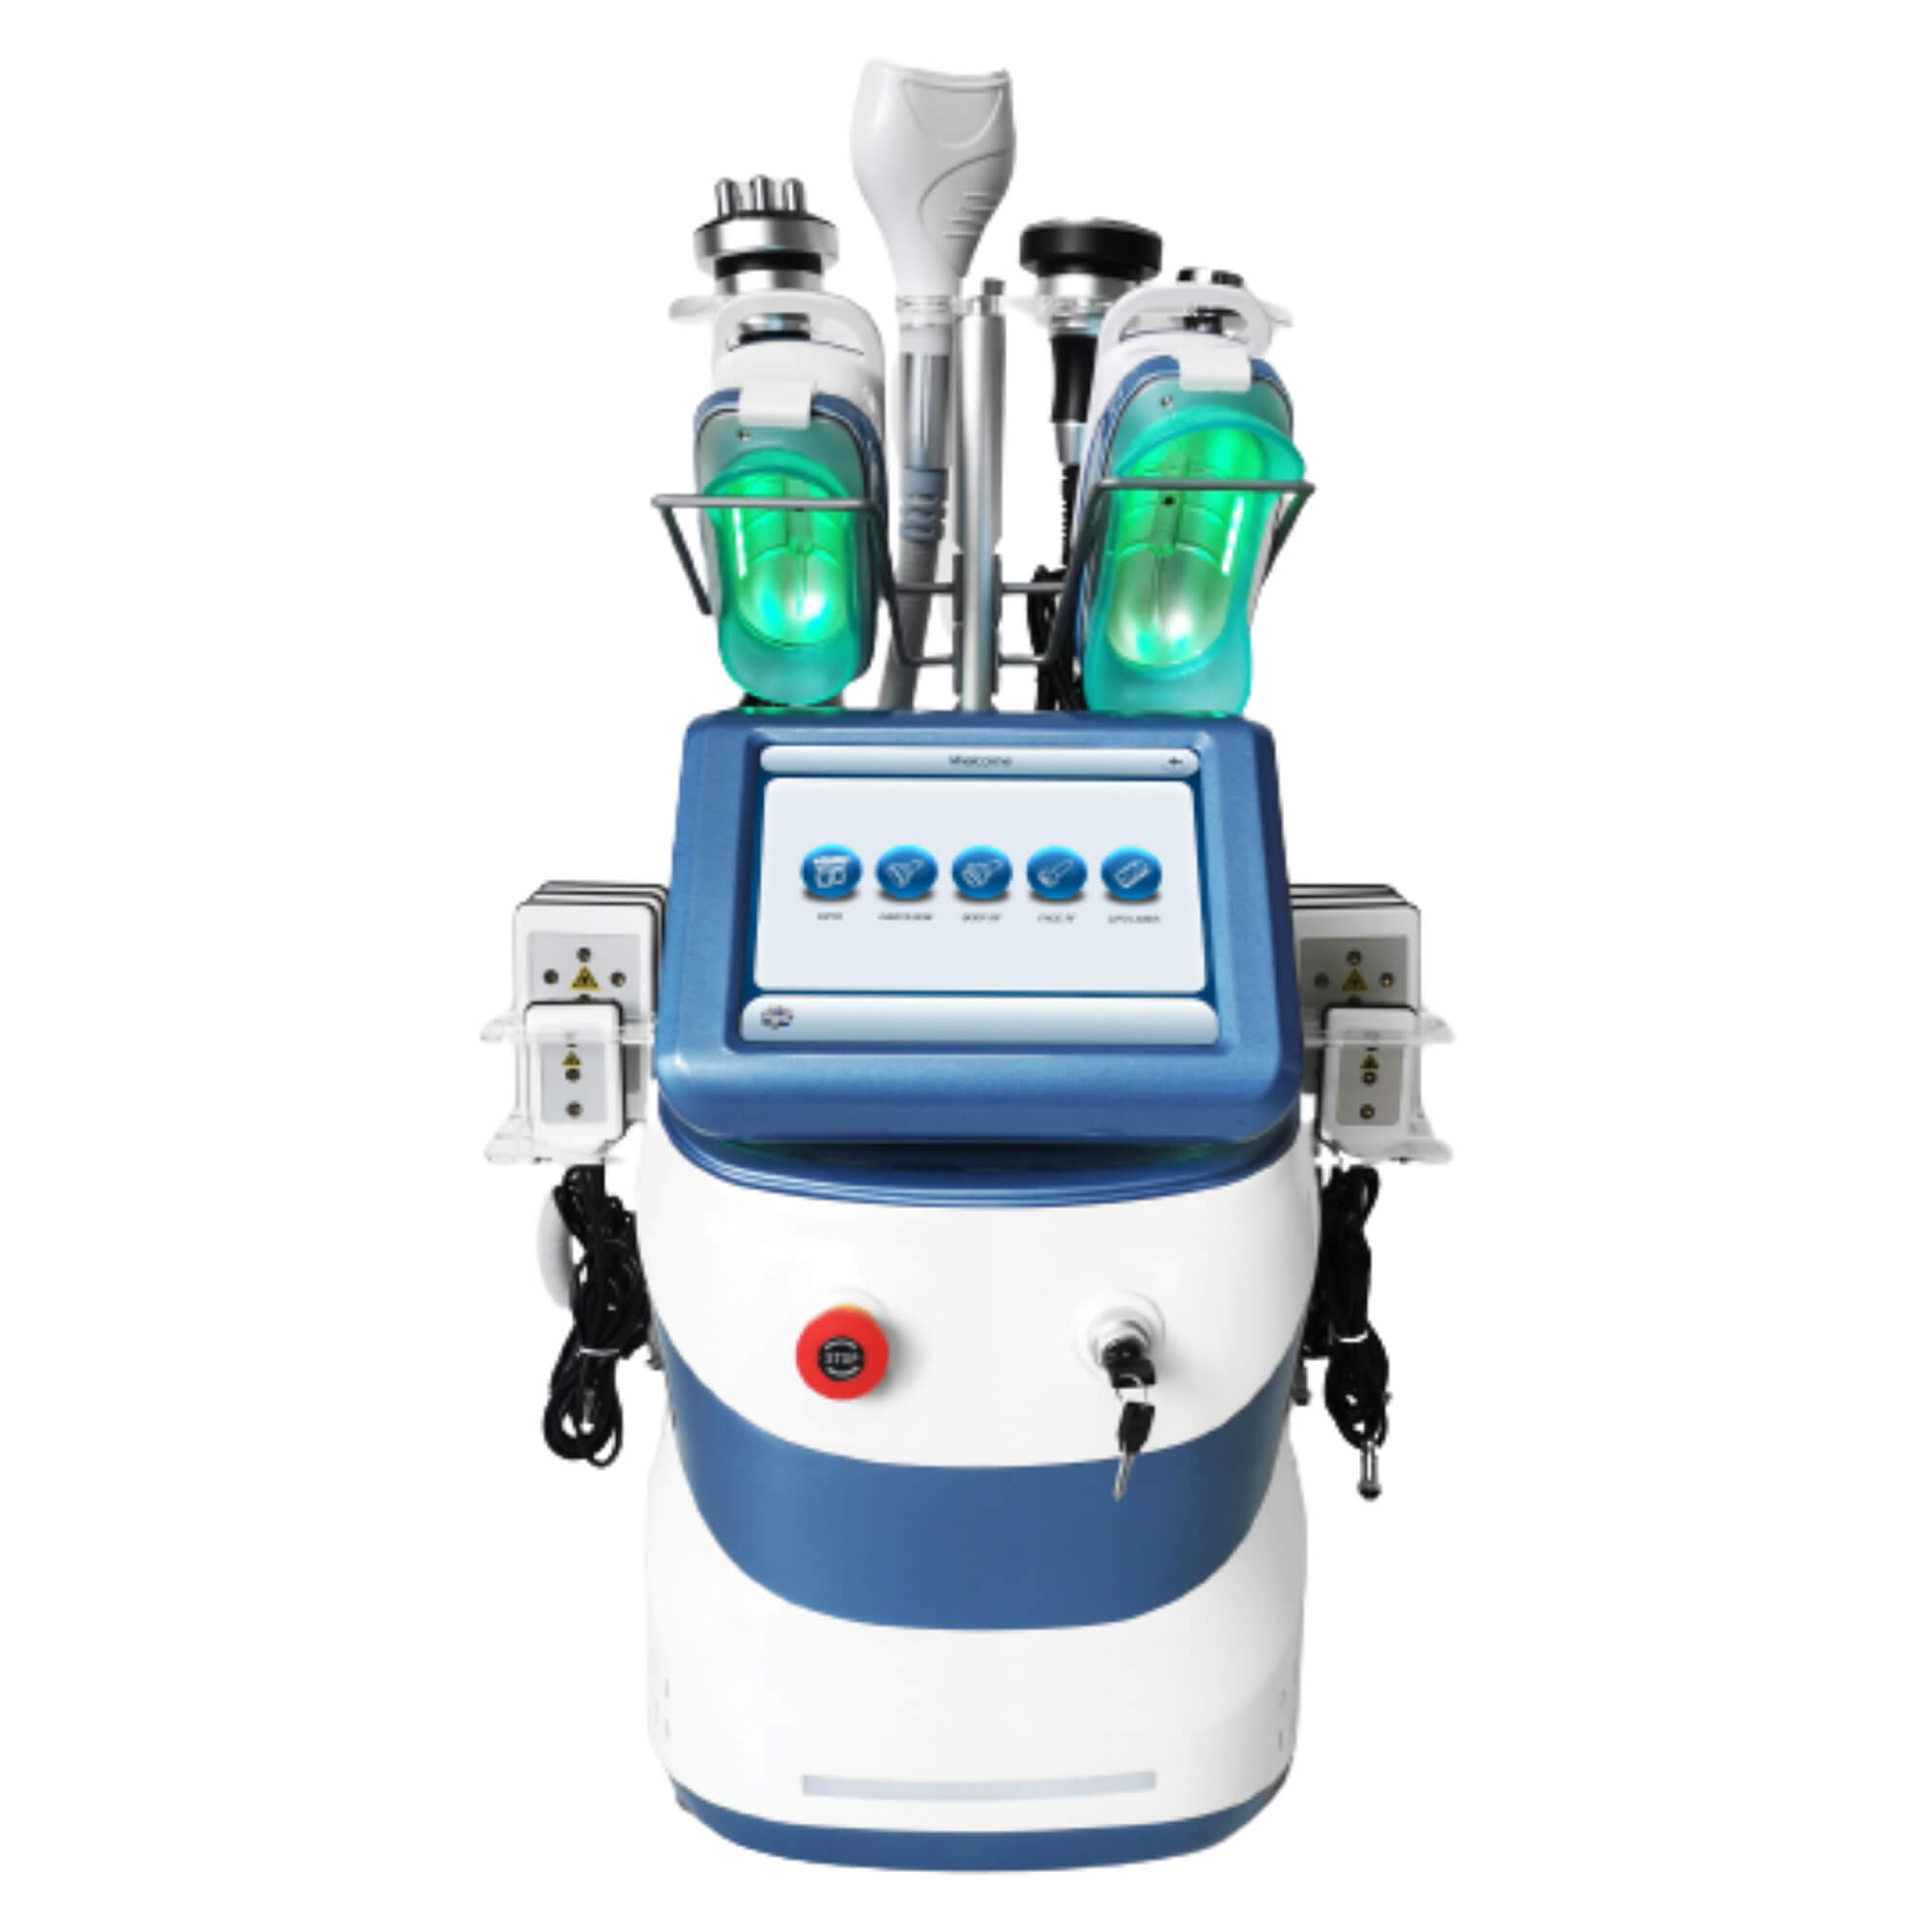 360-degree Cool Sculpting Fat Freezing Machine for Chin